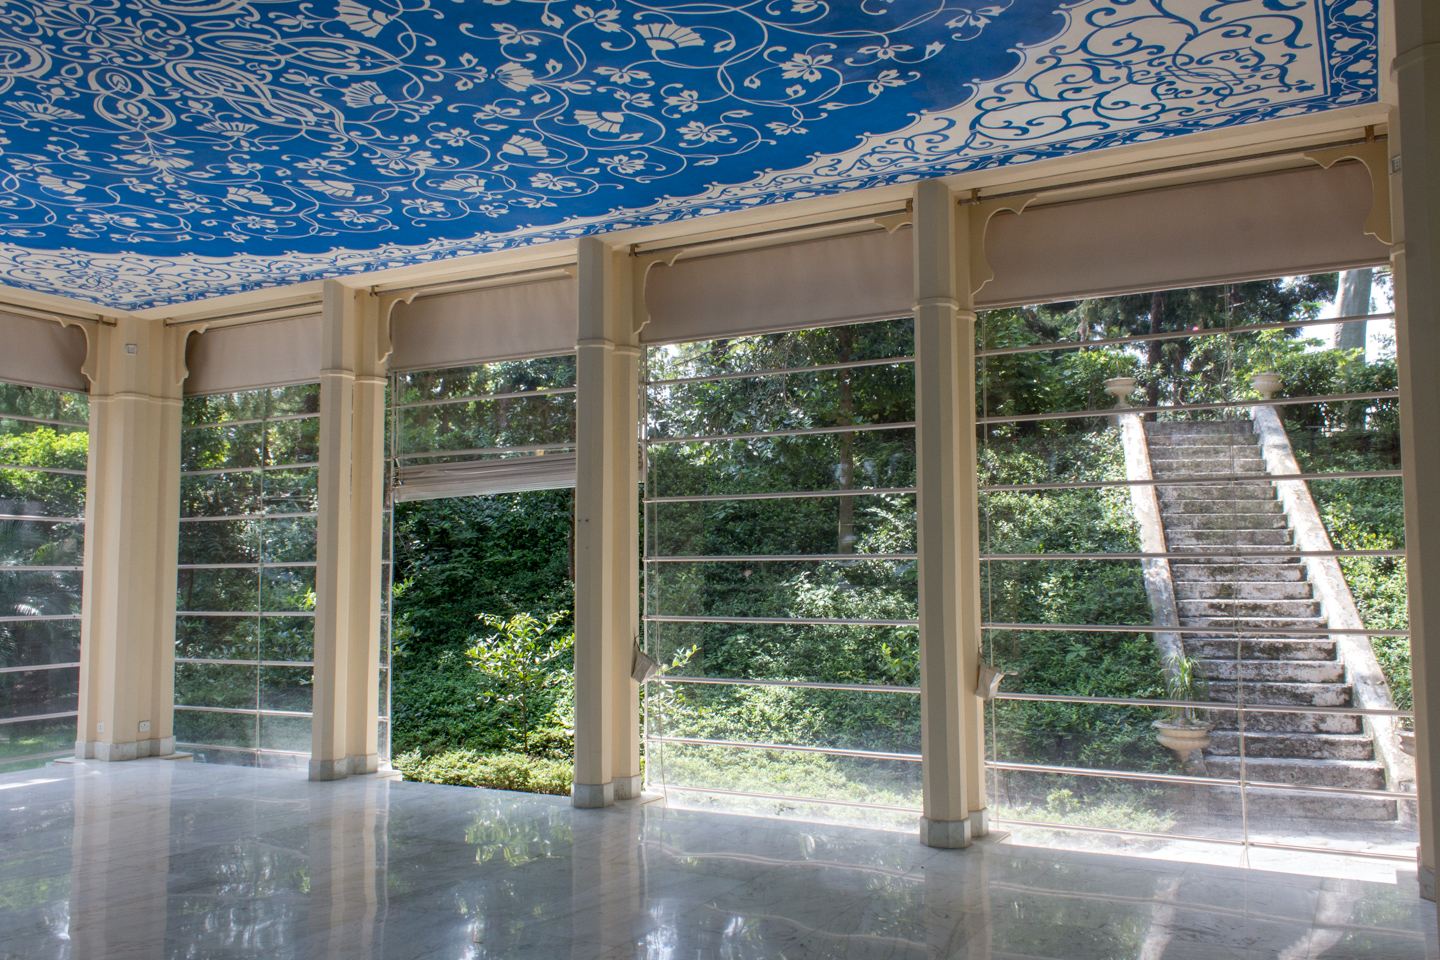 An interior view of the yoga pavilion.